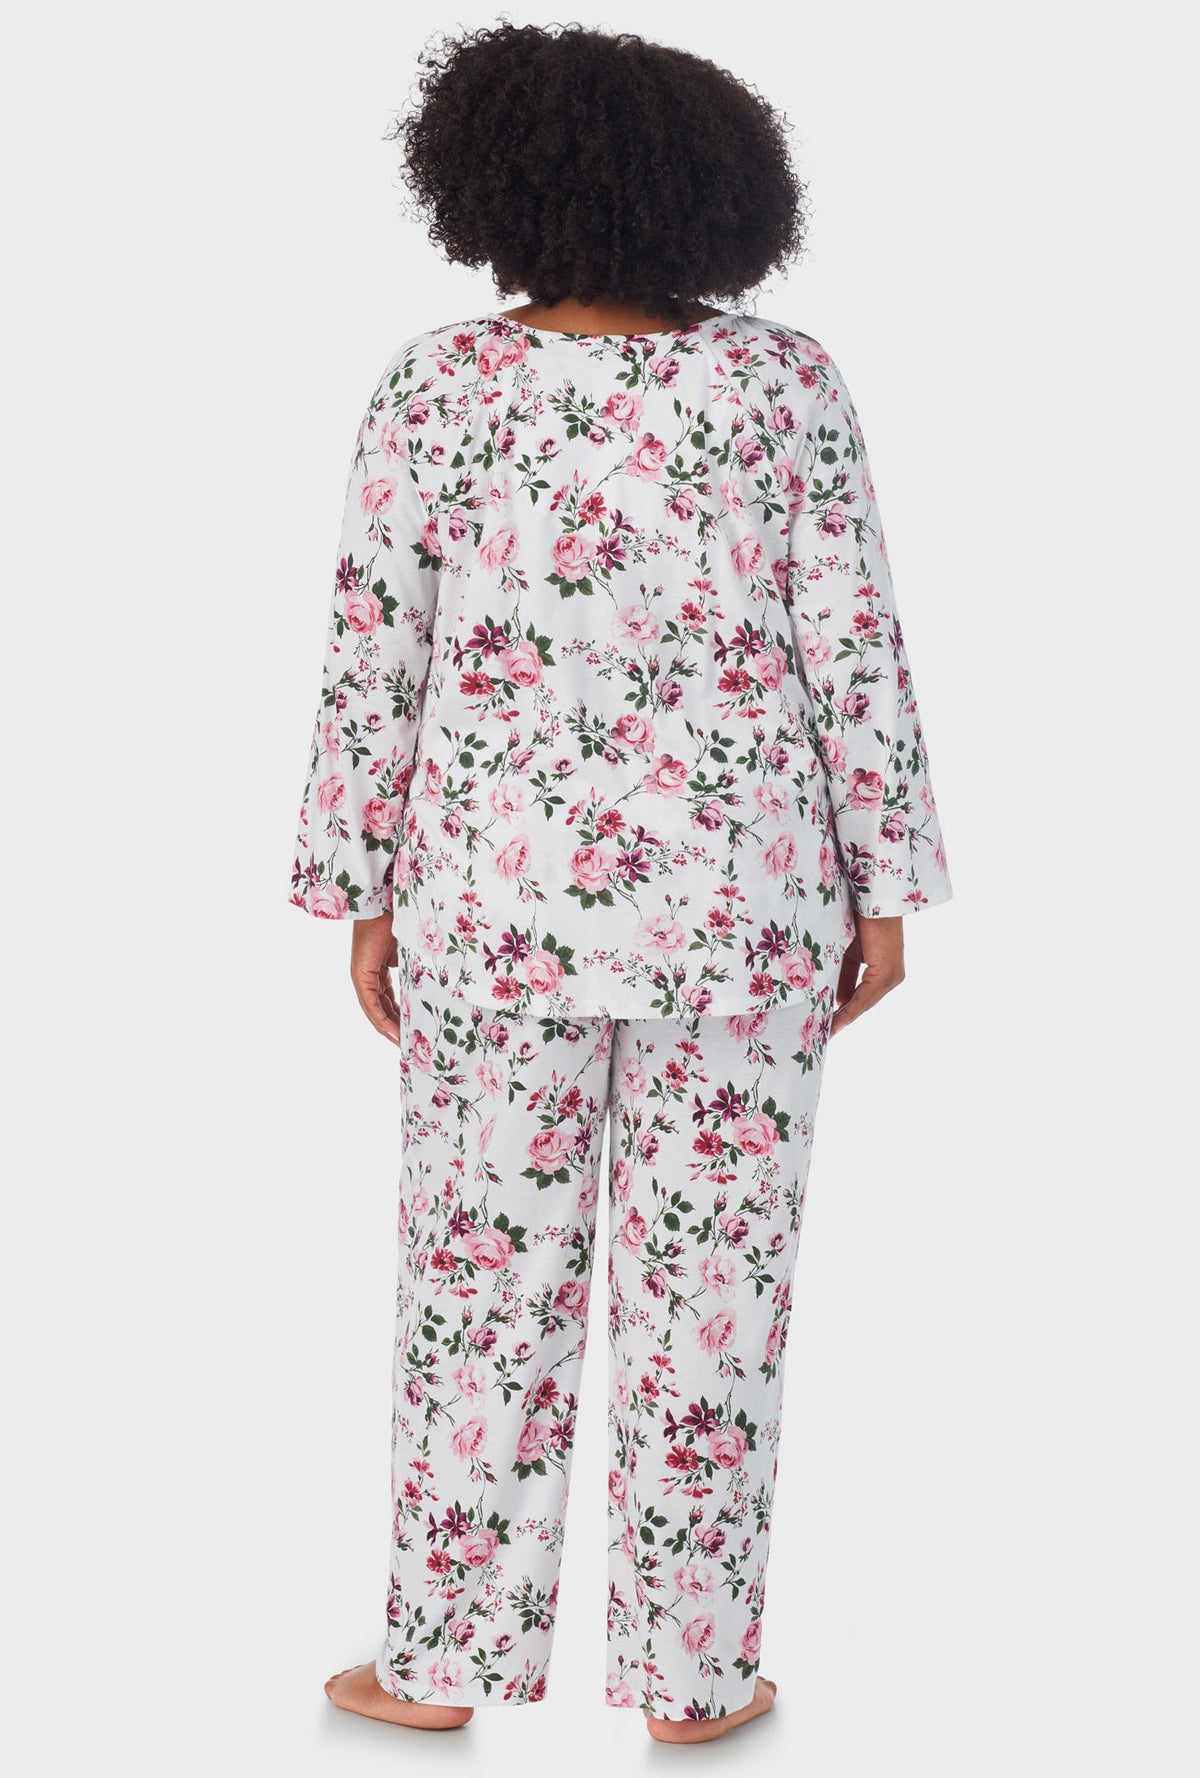 A lady wearing 3/4 Sleeve Long Pant plus size PJ Set with Pink and Berry Roses   print